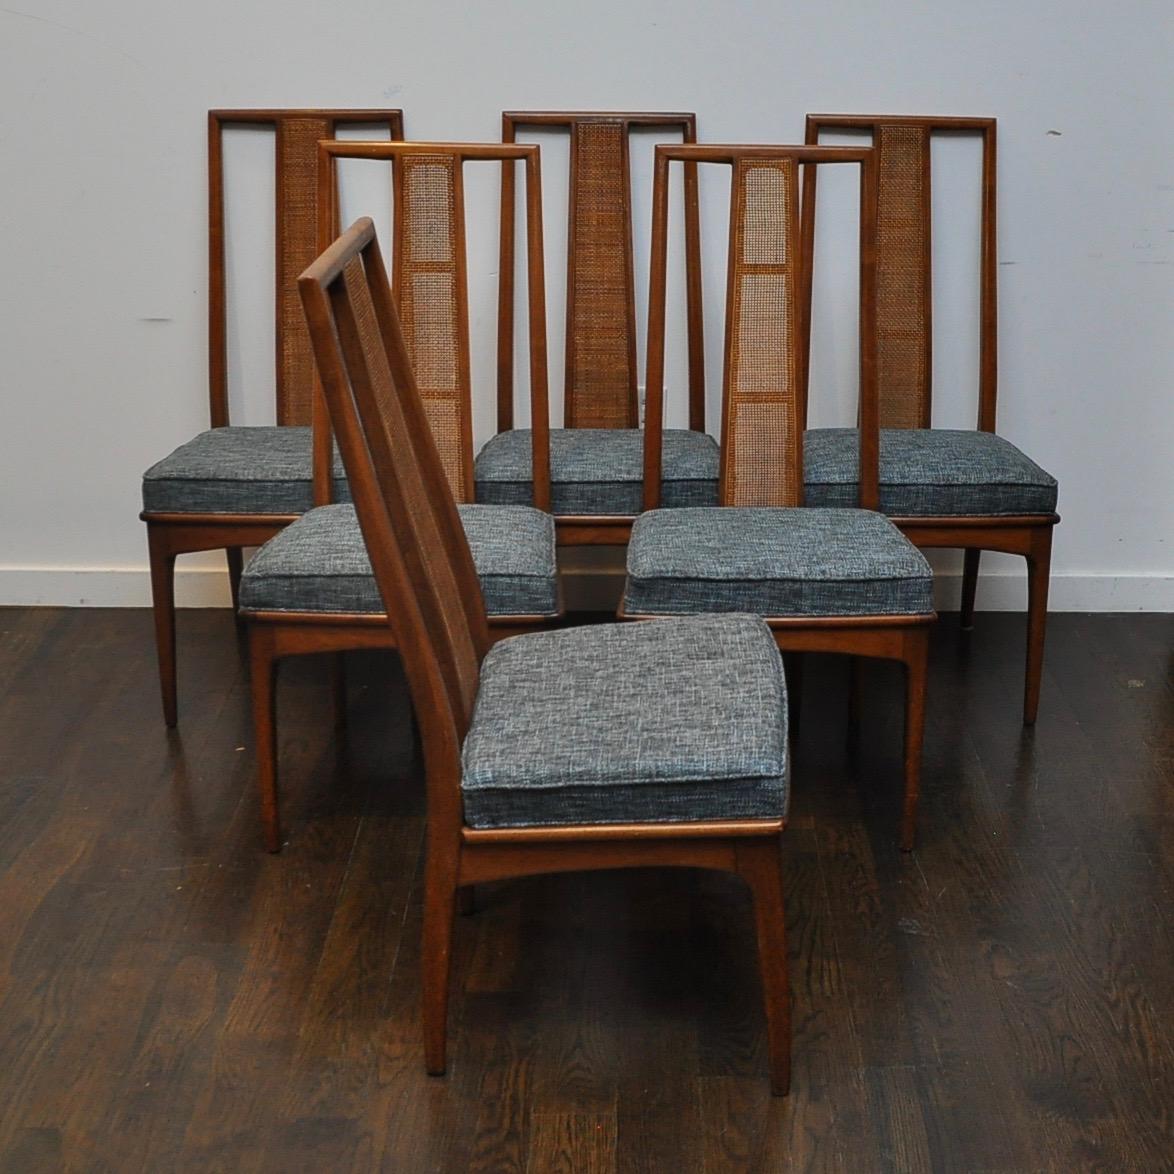 Clean set of 6 Mid-Century Modern walnut cane-backed dining chairs with new upholstery. Upholstery is made up of shades of light and dark blue and black.